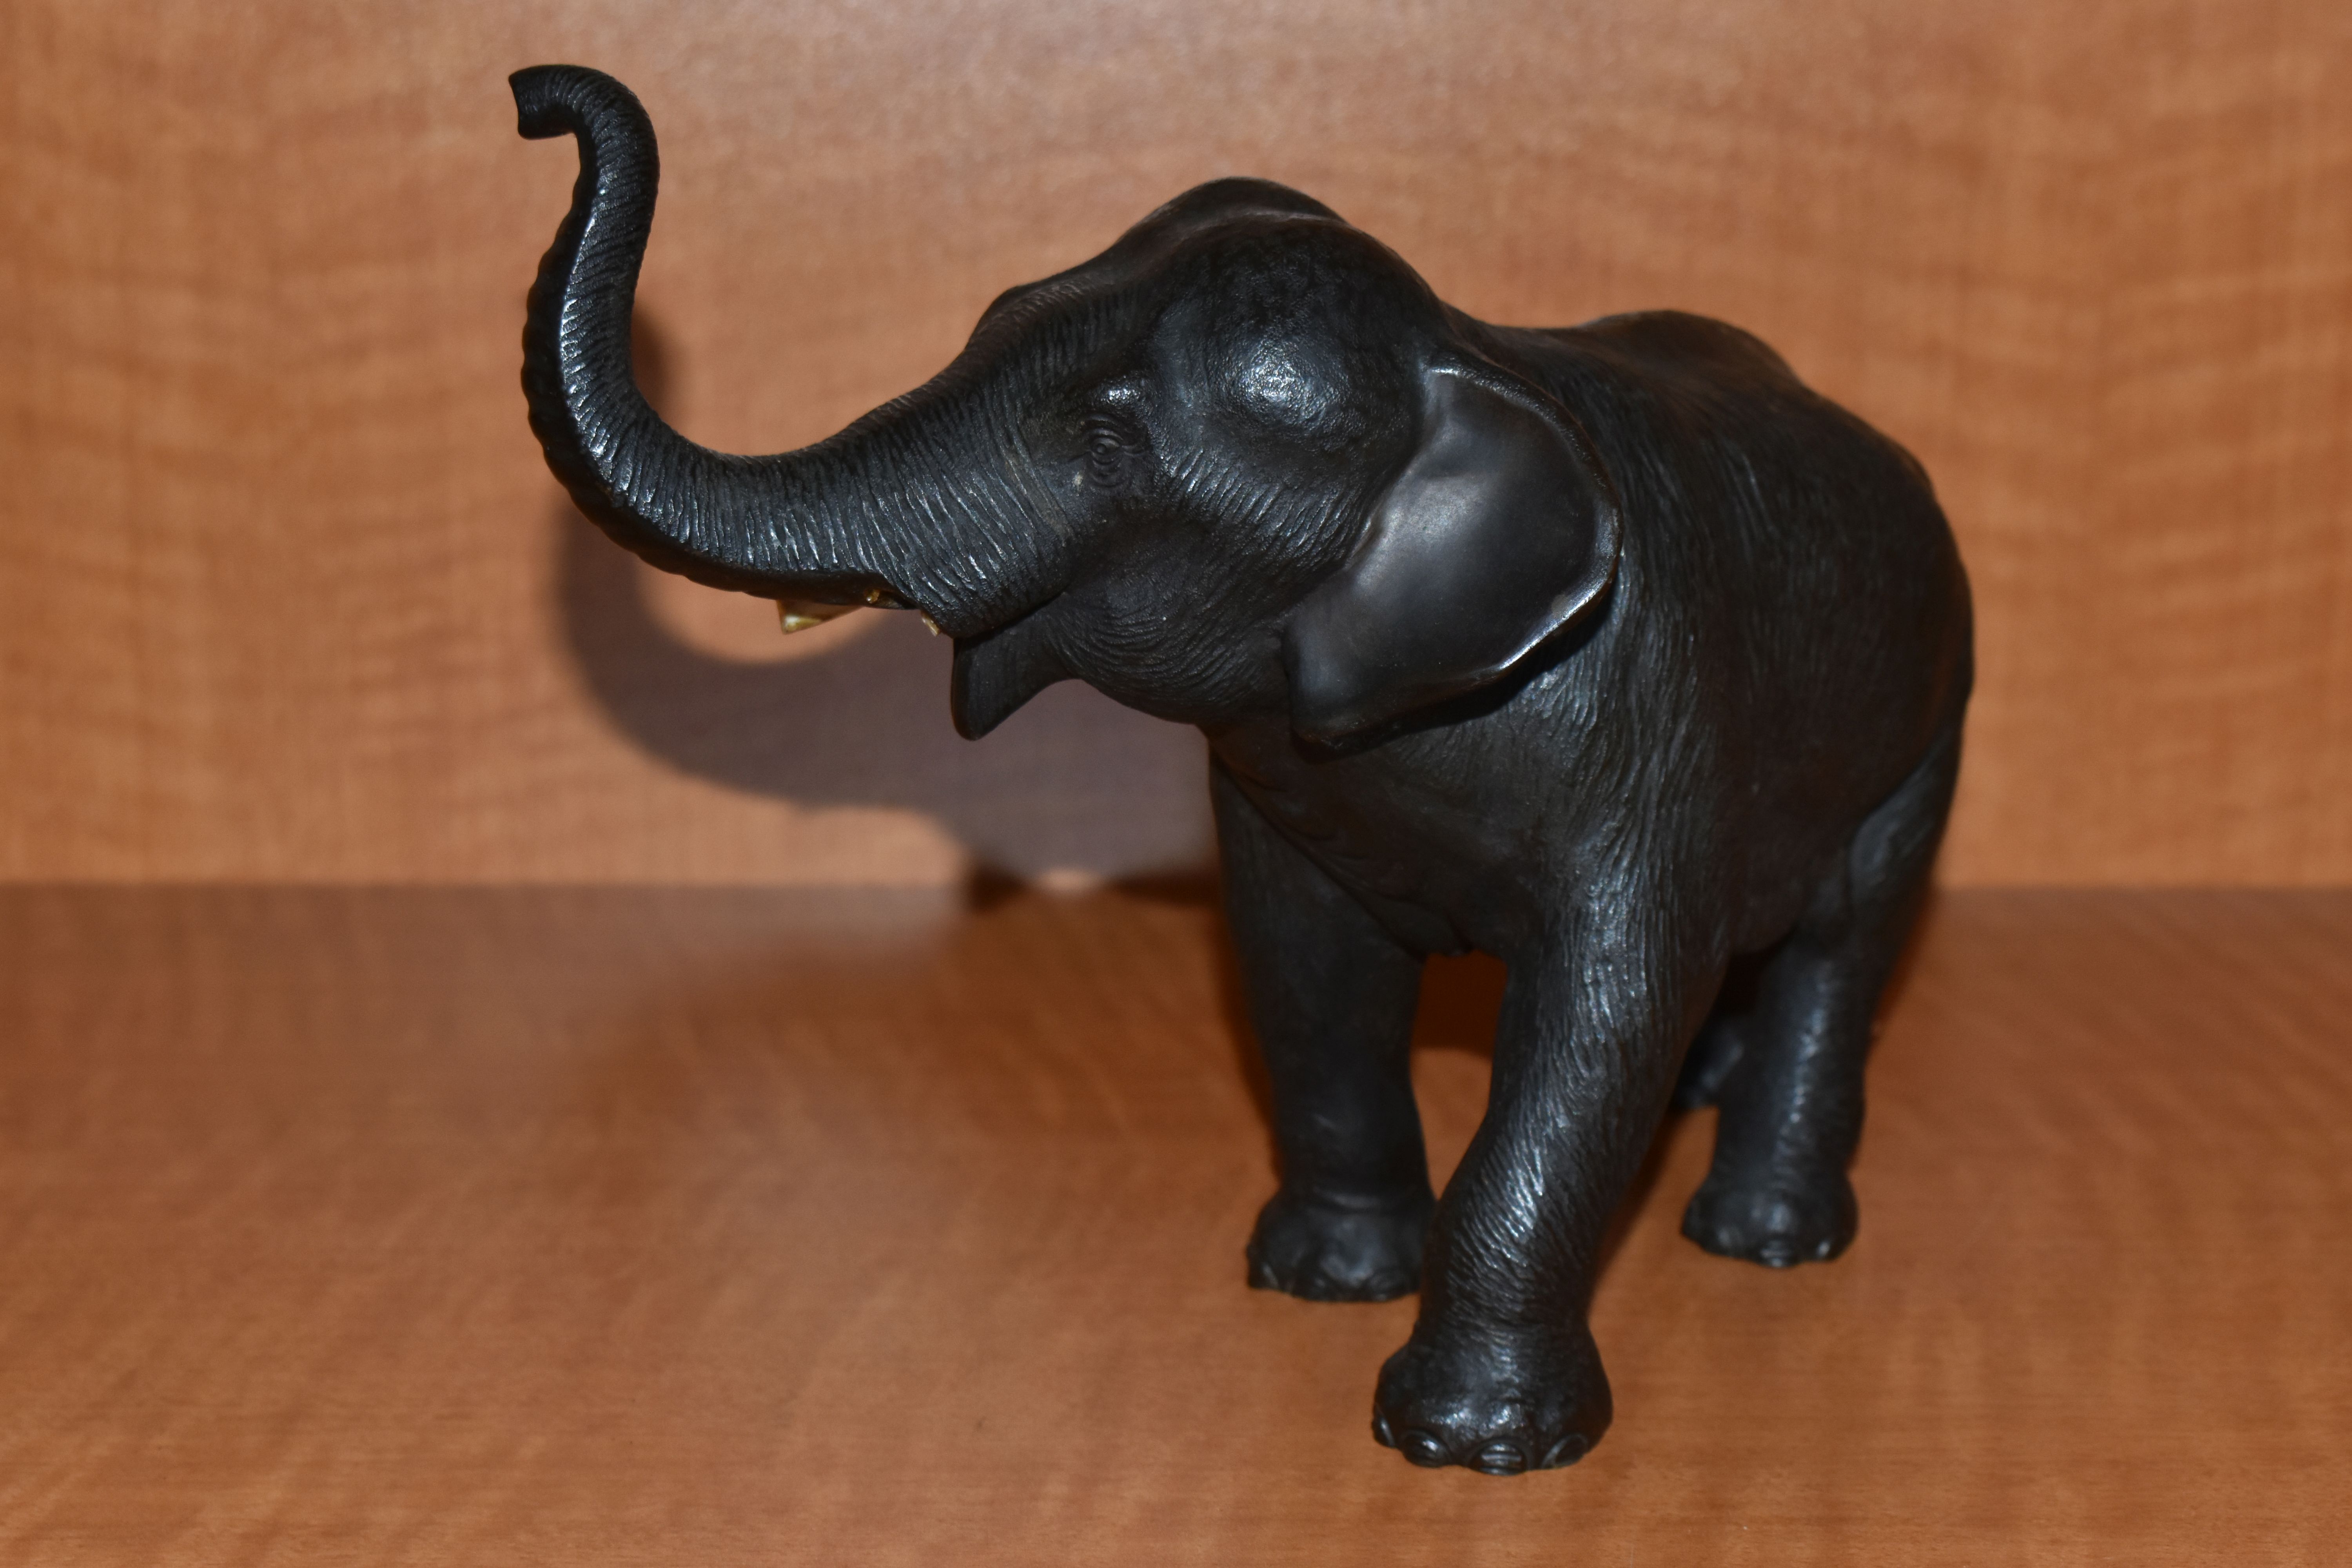 A LATE 19TH CENTURY MEIJI PERIOD JAPANESE BRONZE FIGURE OF AN ELEPHANT WITH TRUNK RAISED, remnants - Image 3 of 5